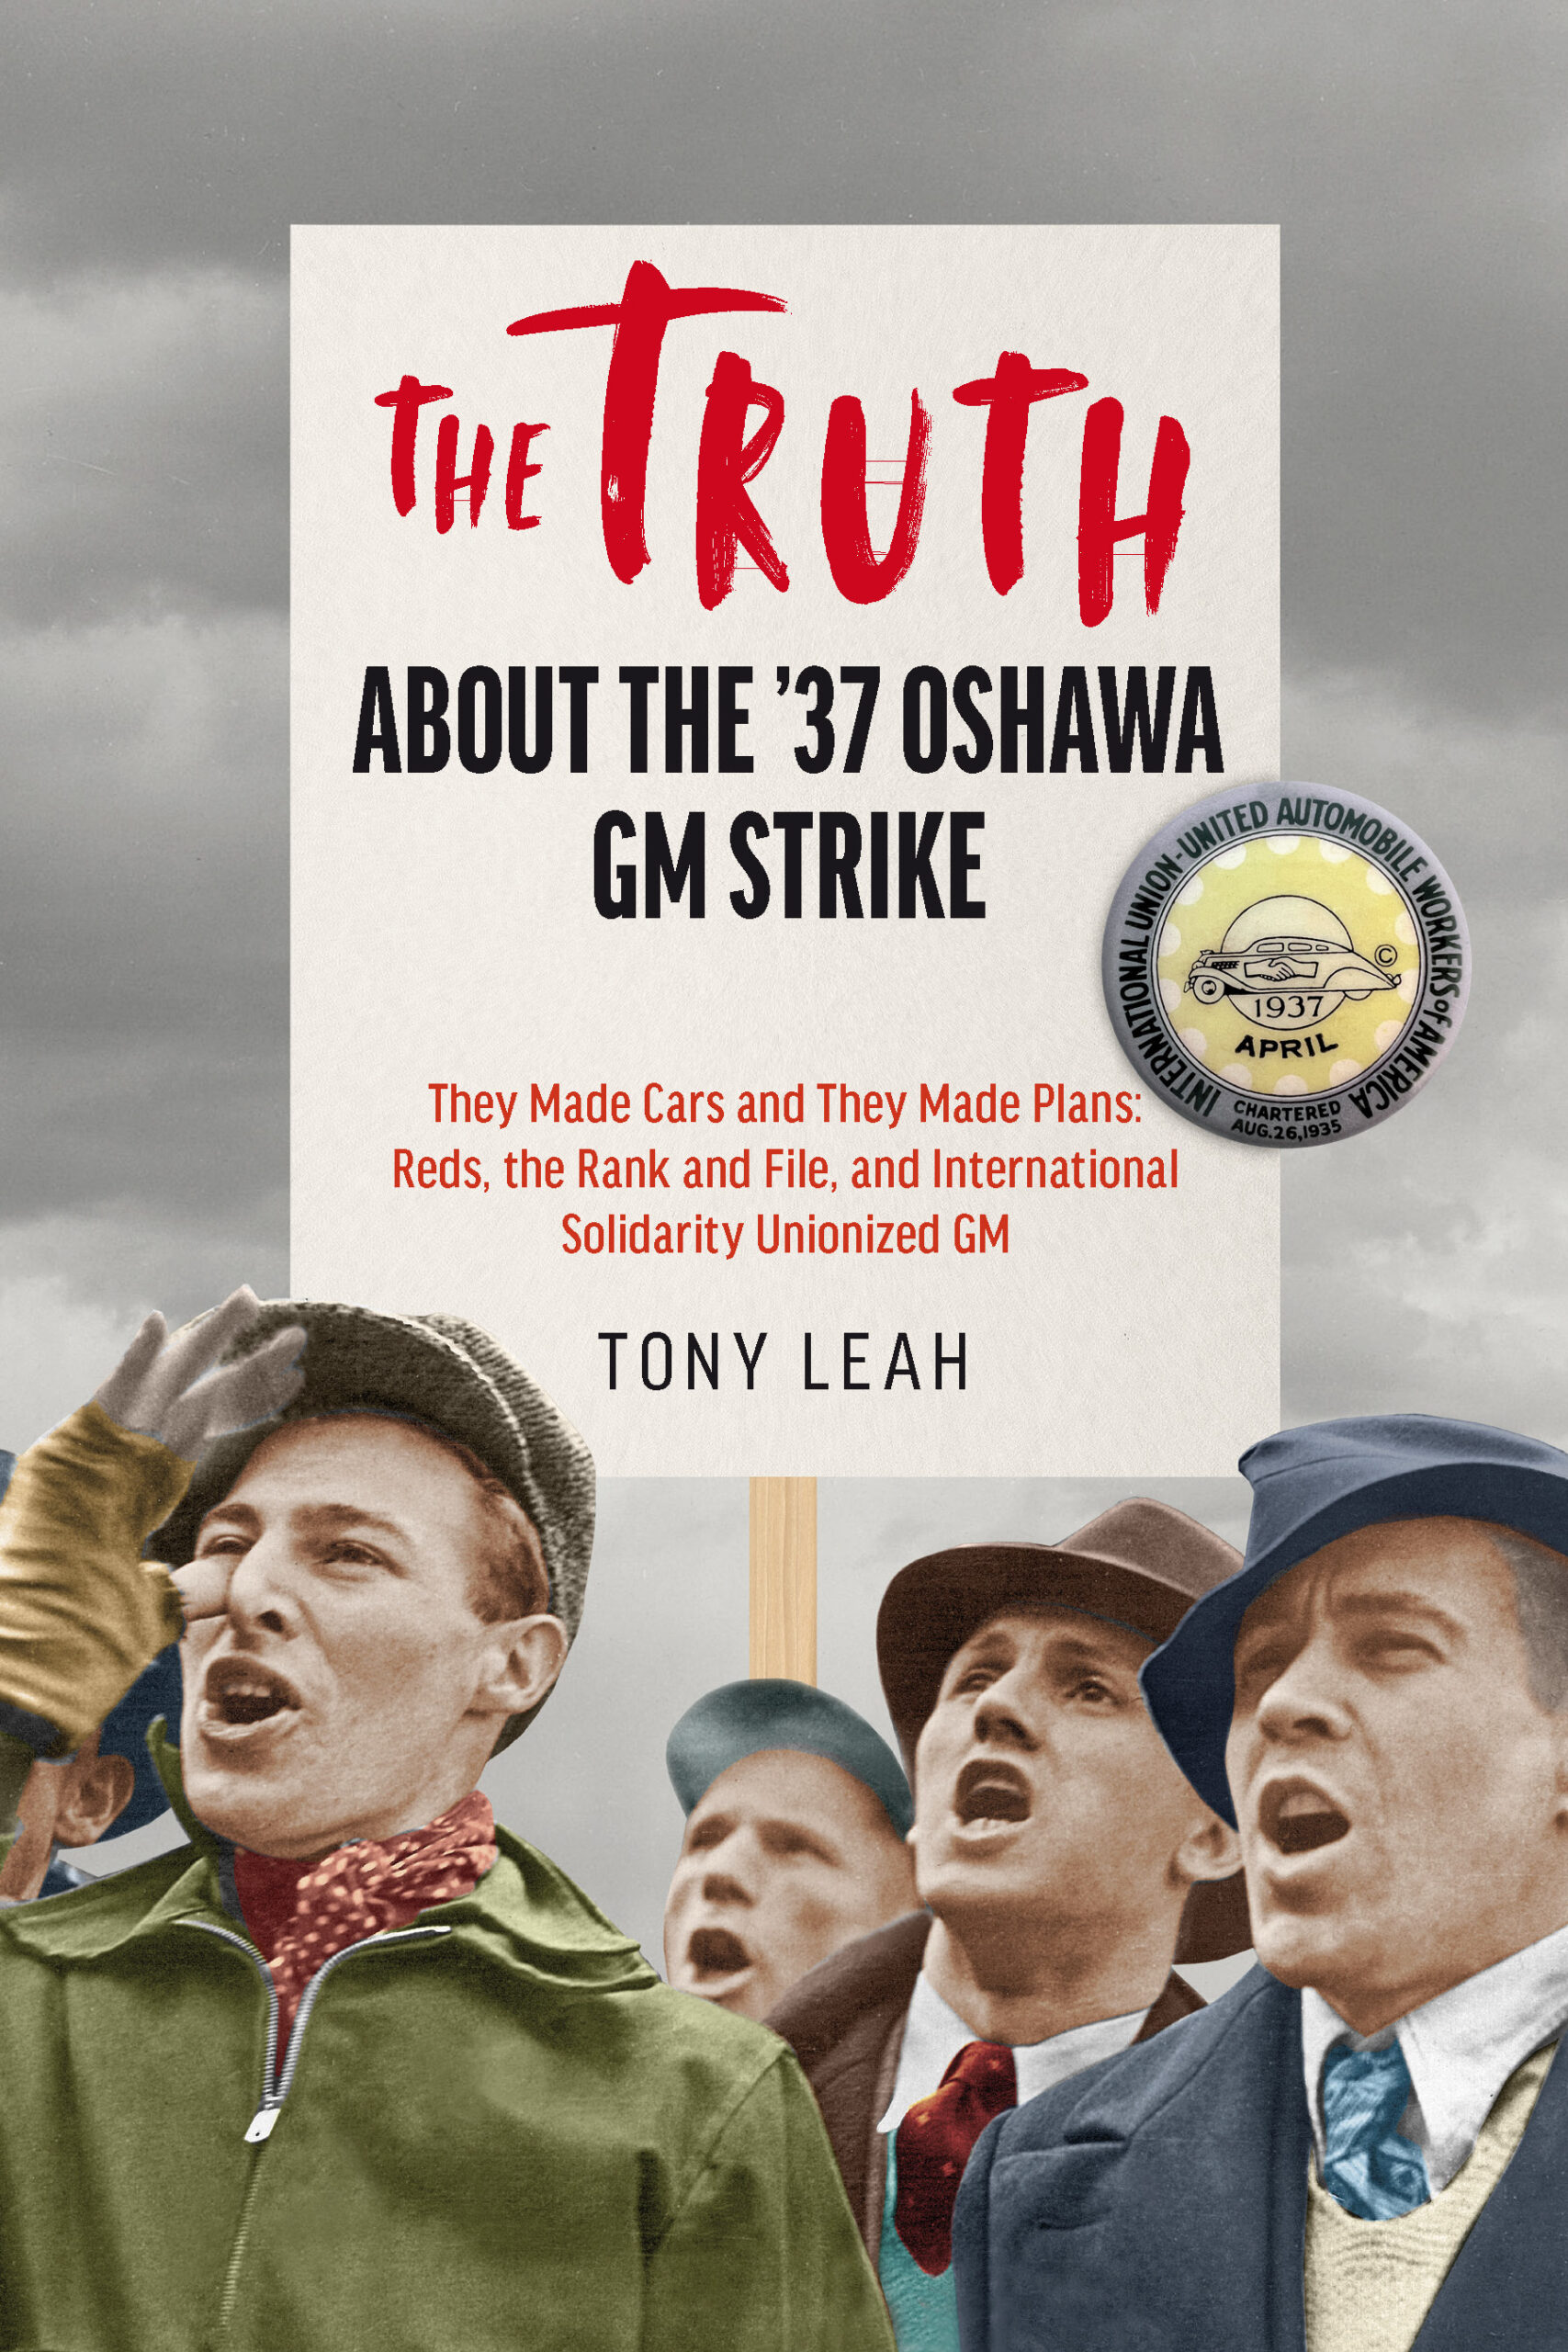 THE TRUTH ABOUT THE ’37 OSHAWA GM STRIKE